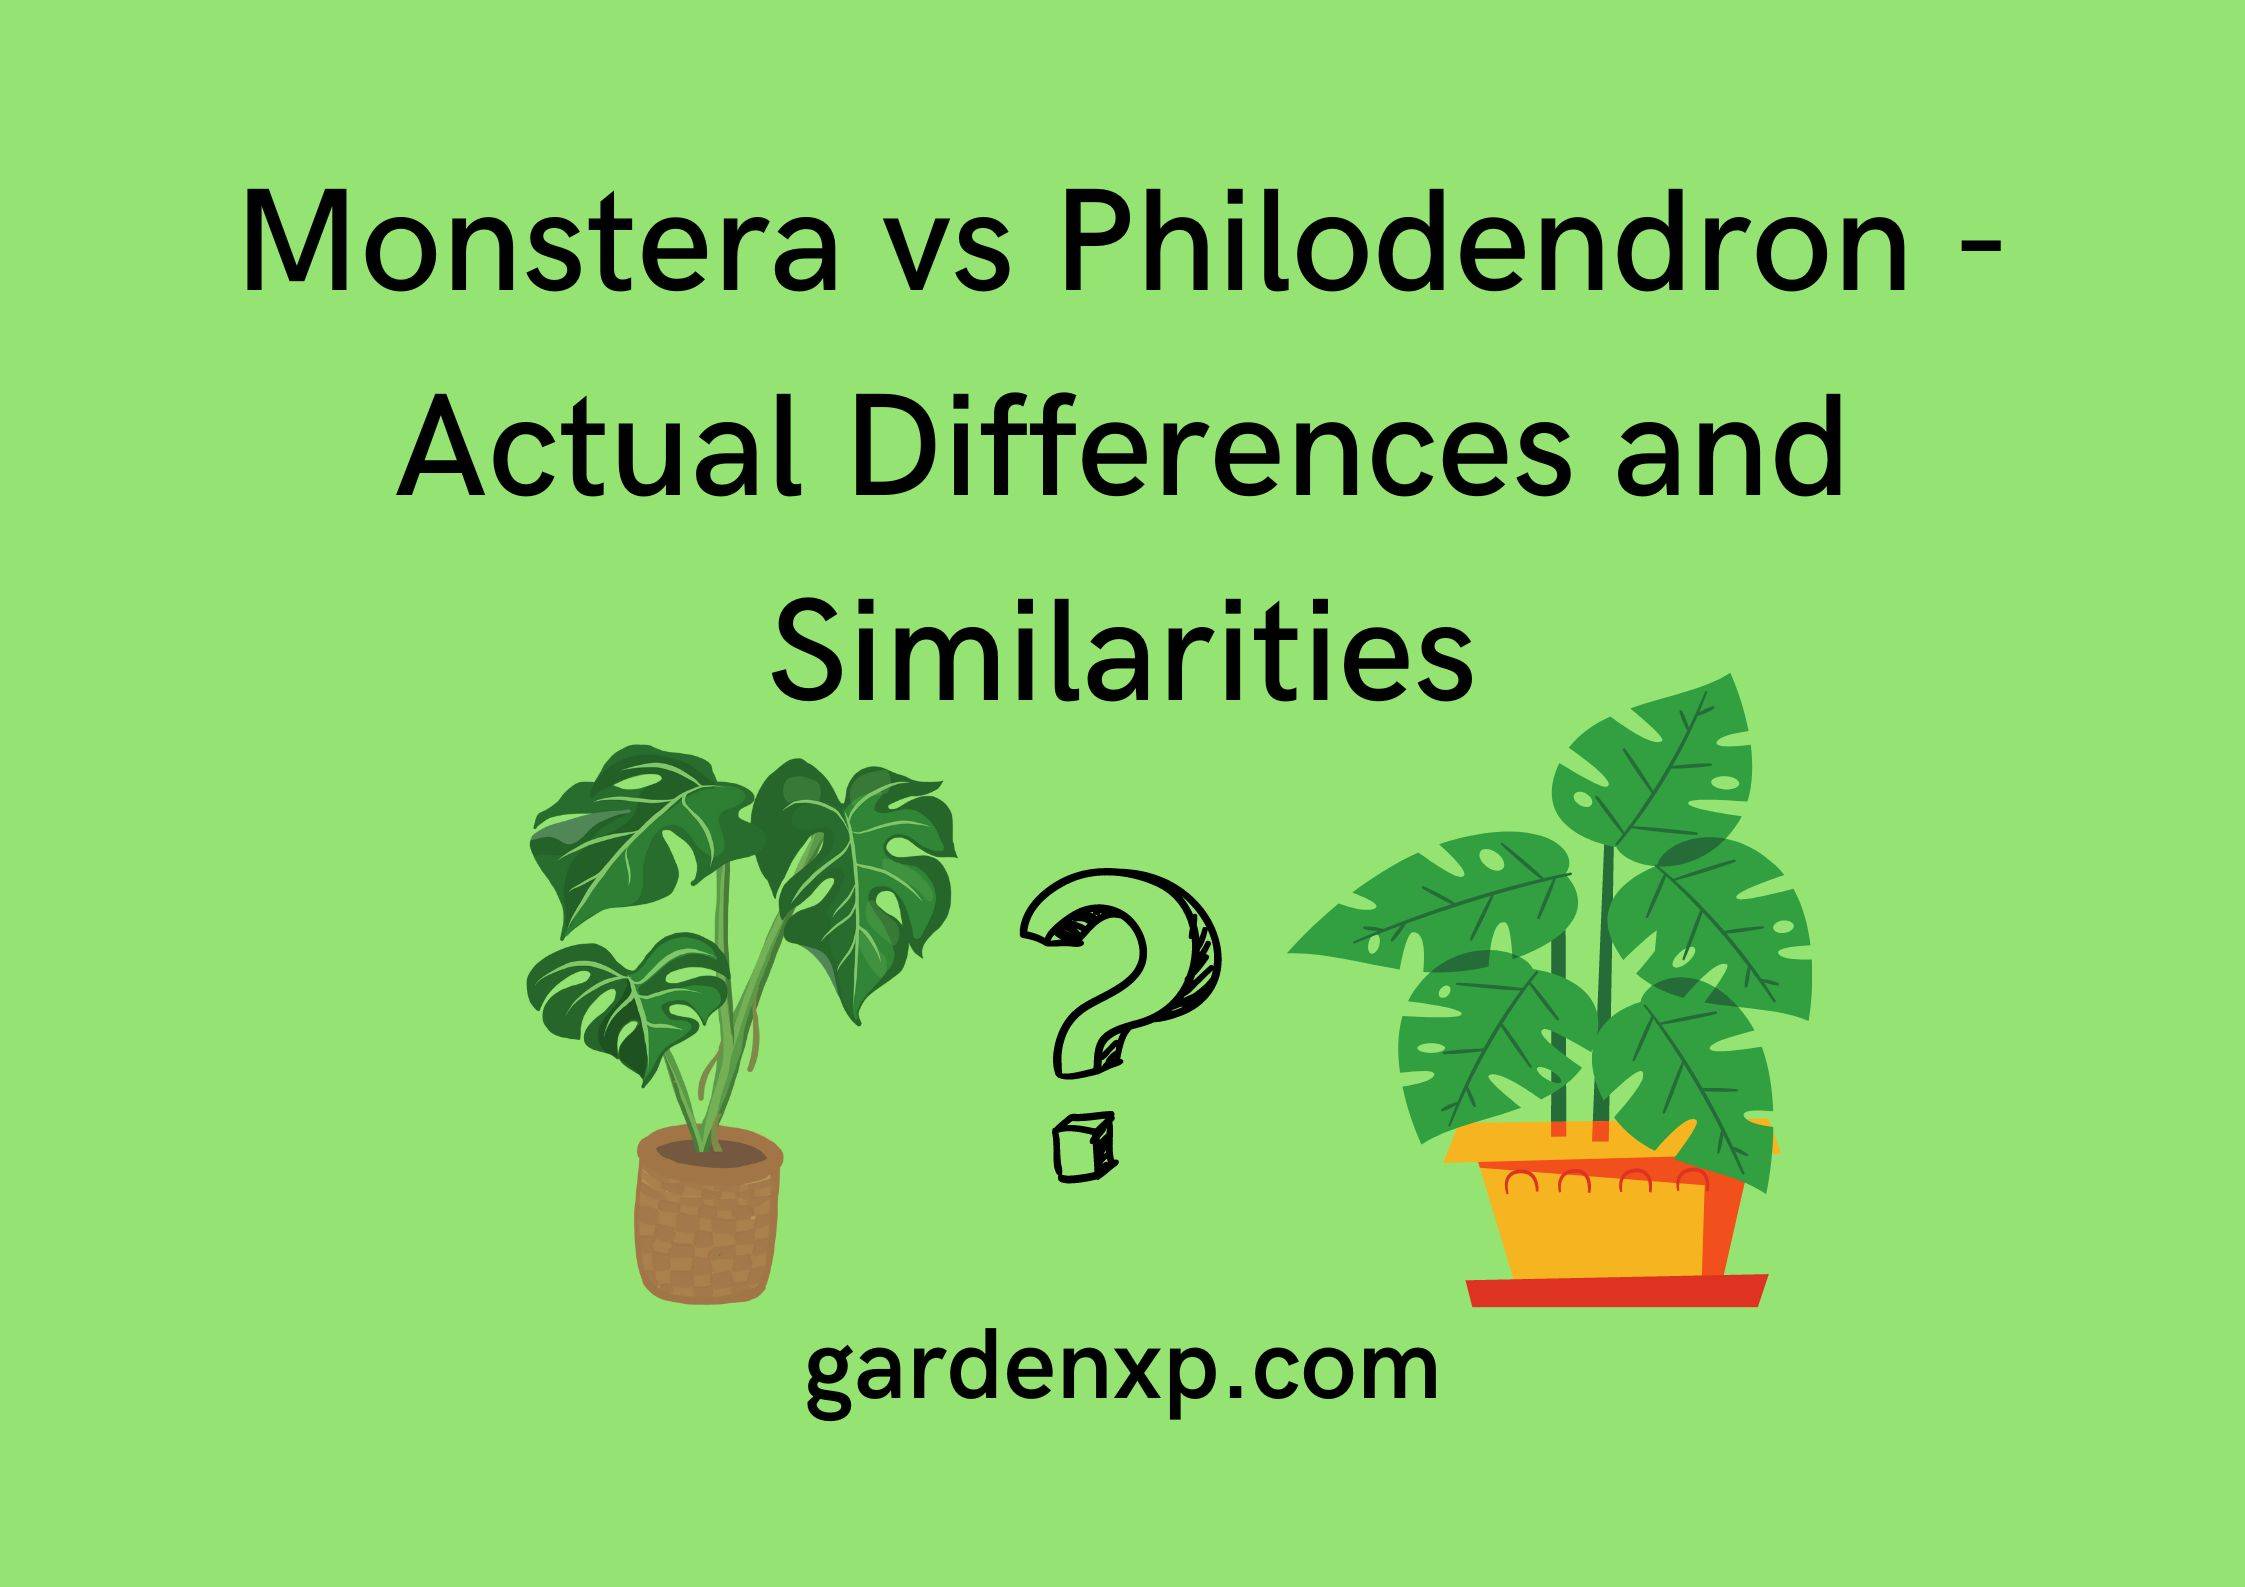 Monstera vs Philodendron - Actual Differences and Similarities